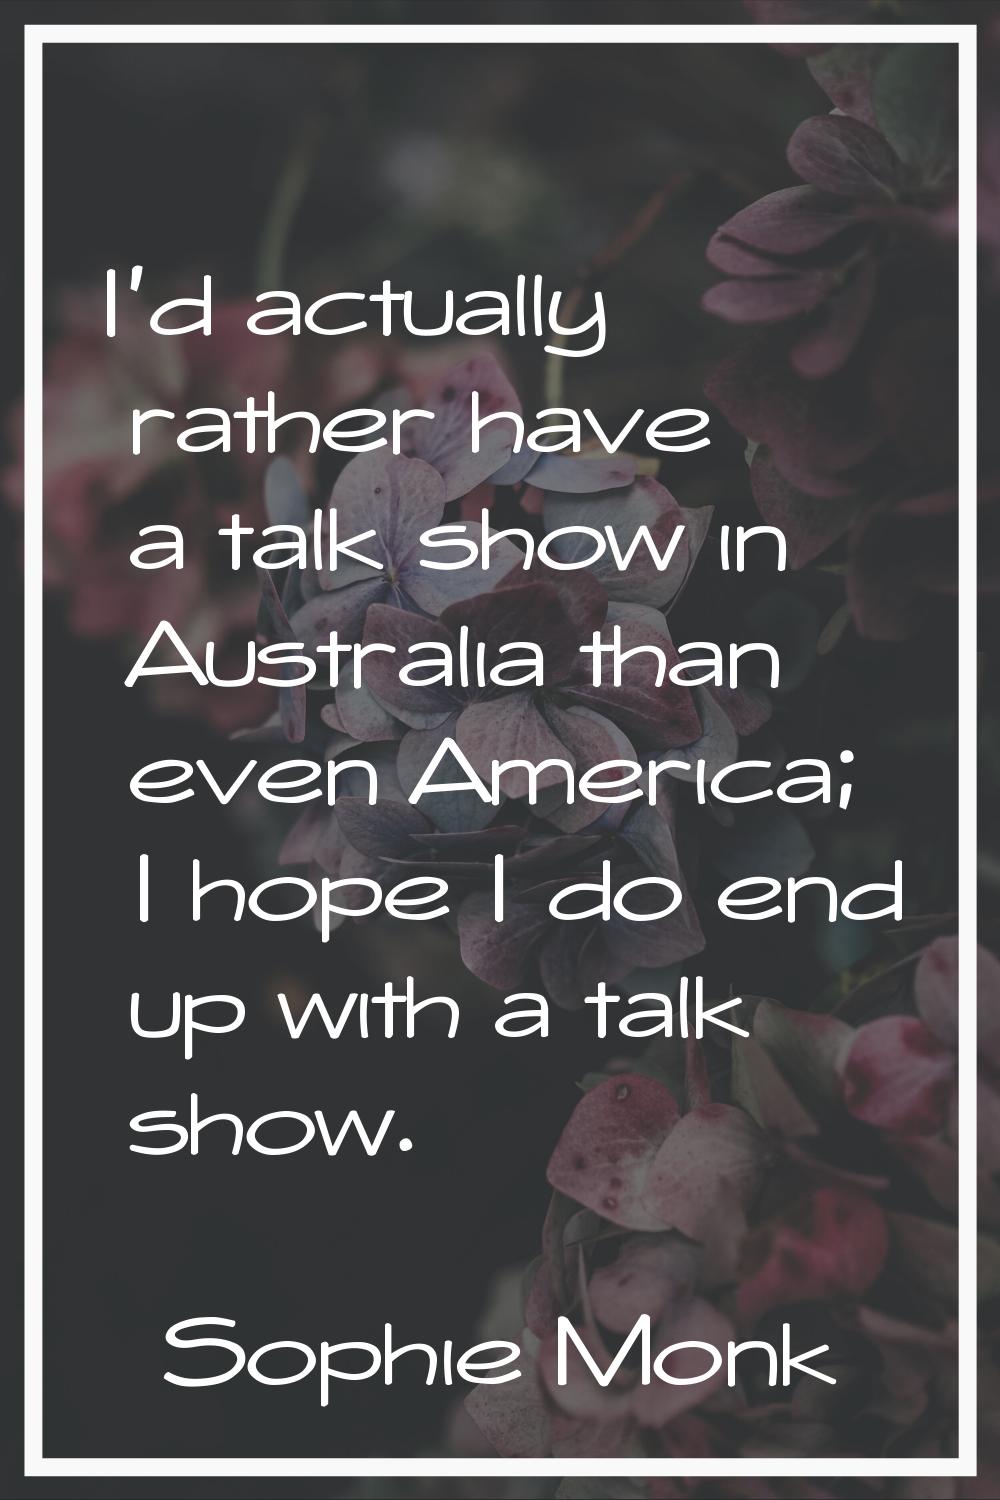 I'd actually rather have a talk show in Australia than even America; I hope I do end up with a talk